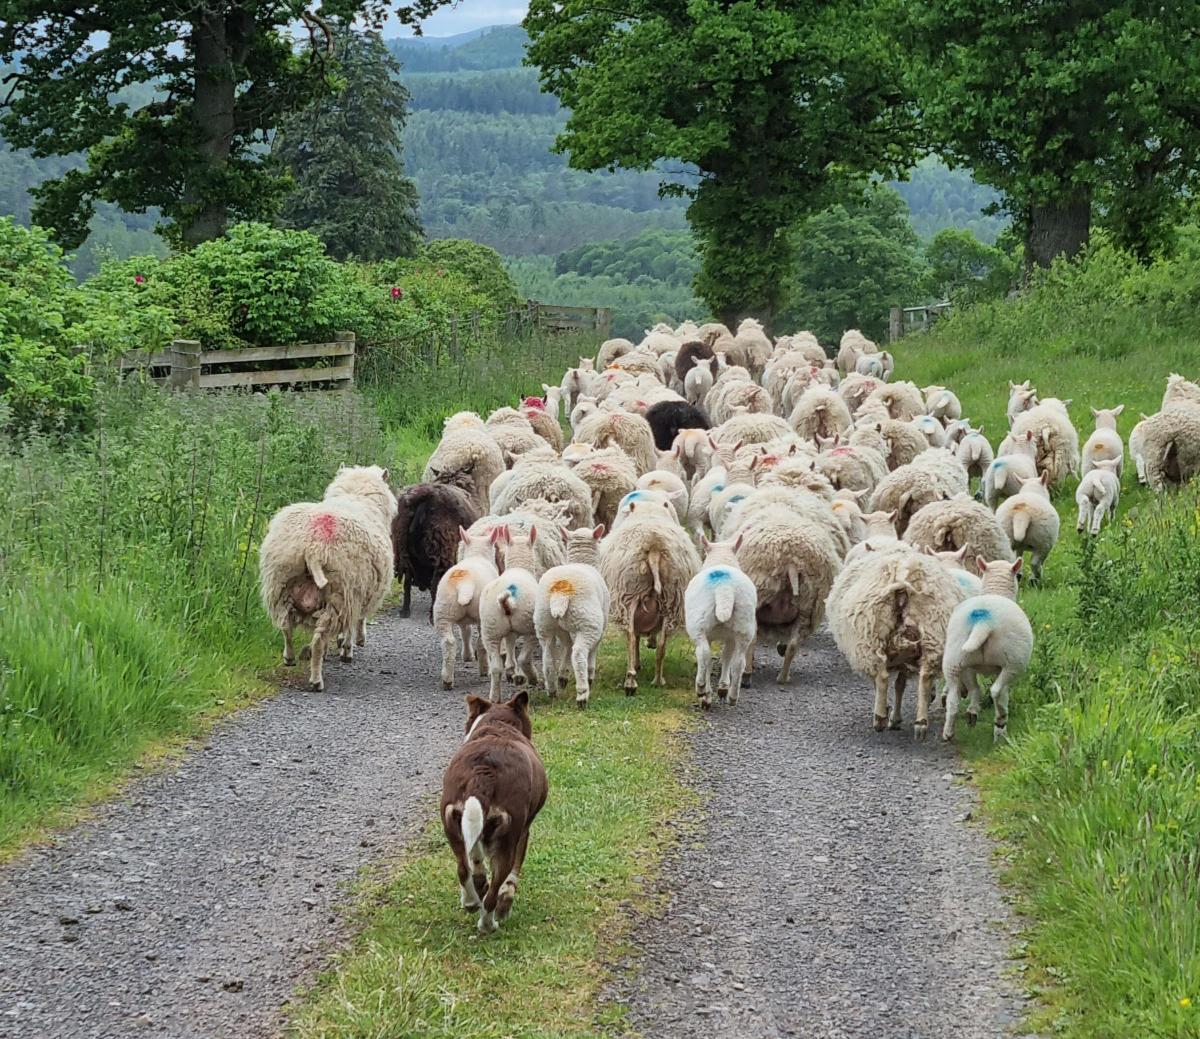 Rebecca Bruce - Moving day for the Shetland sheep, easy work when they cooperate